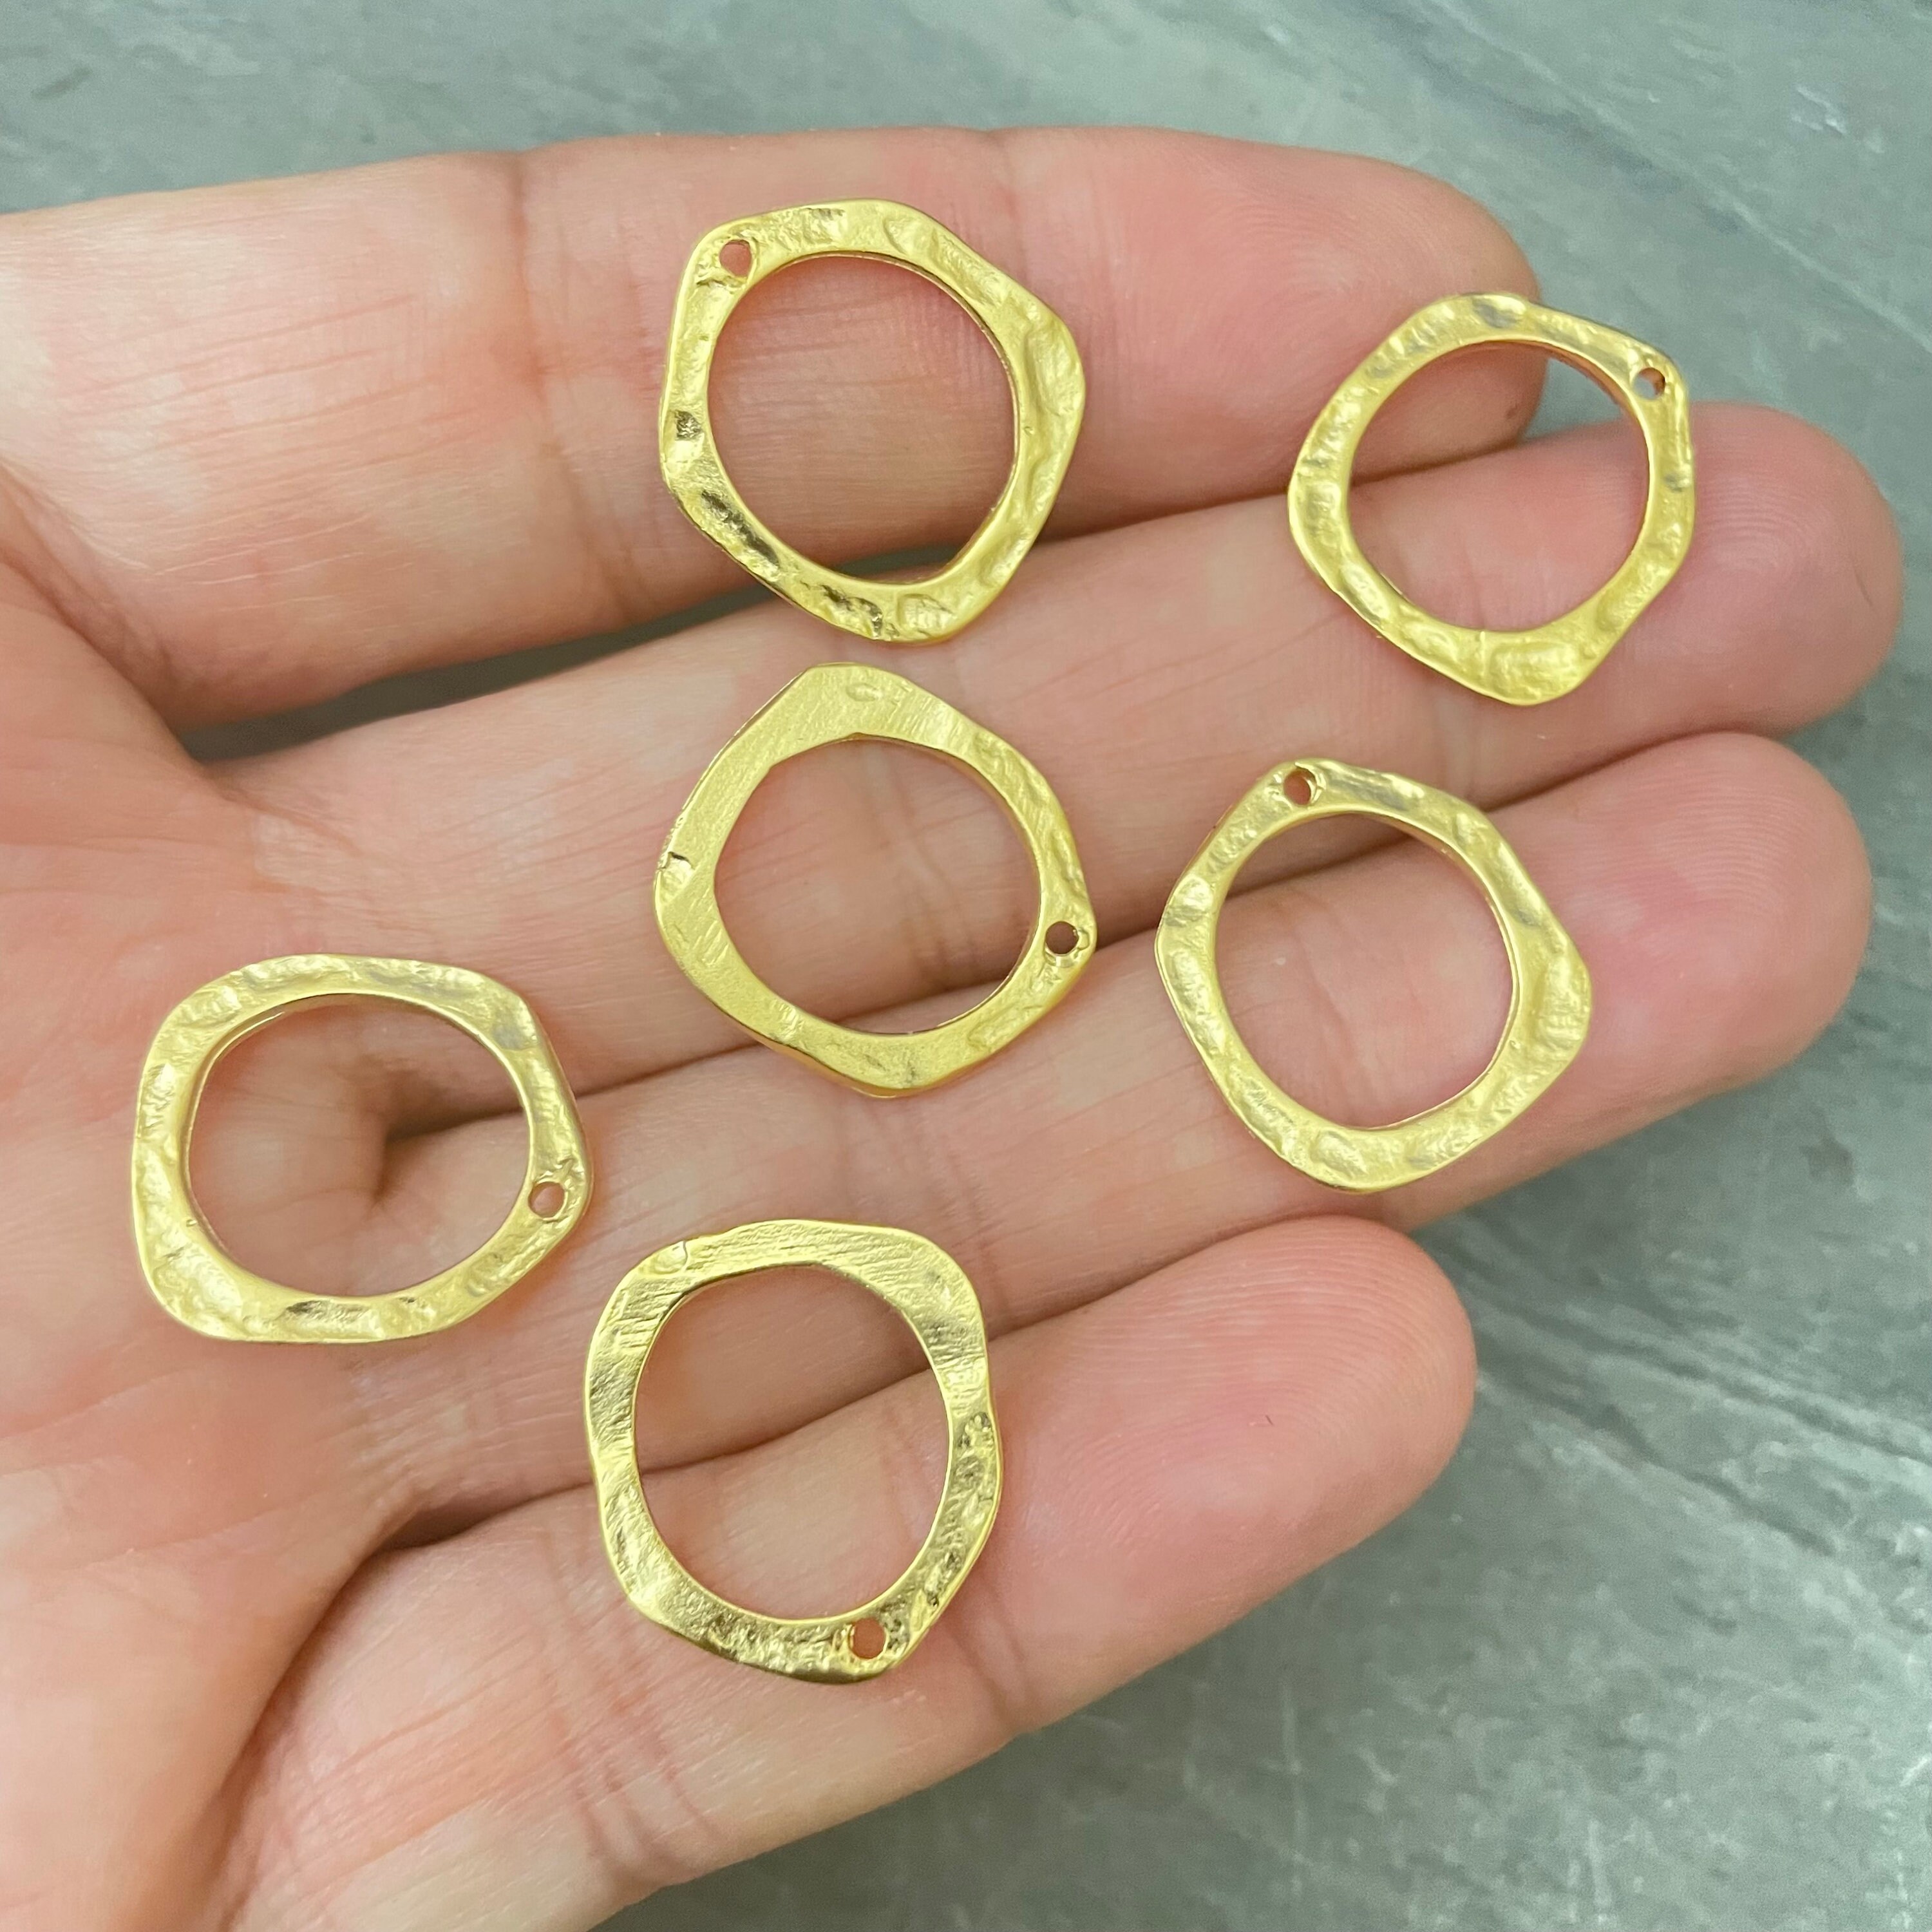 6 Pieces Harmony Earring Findings-Brass Earring Findings-Wholesale earring  findings for jewelry making parts.8102